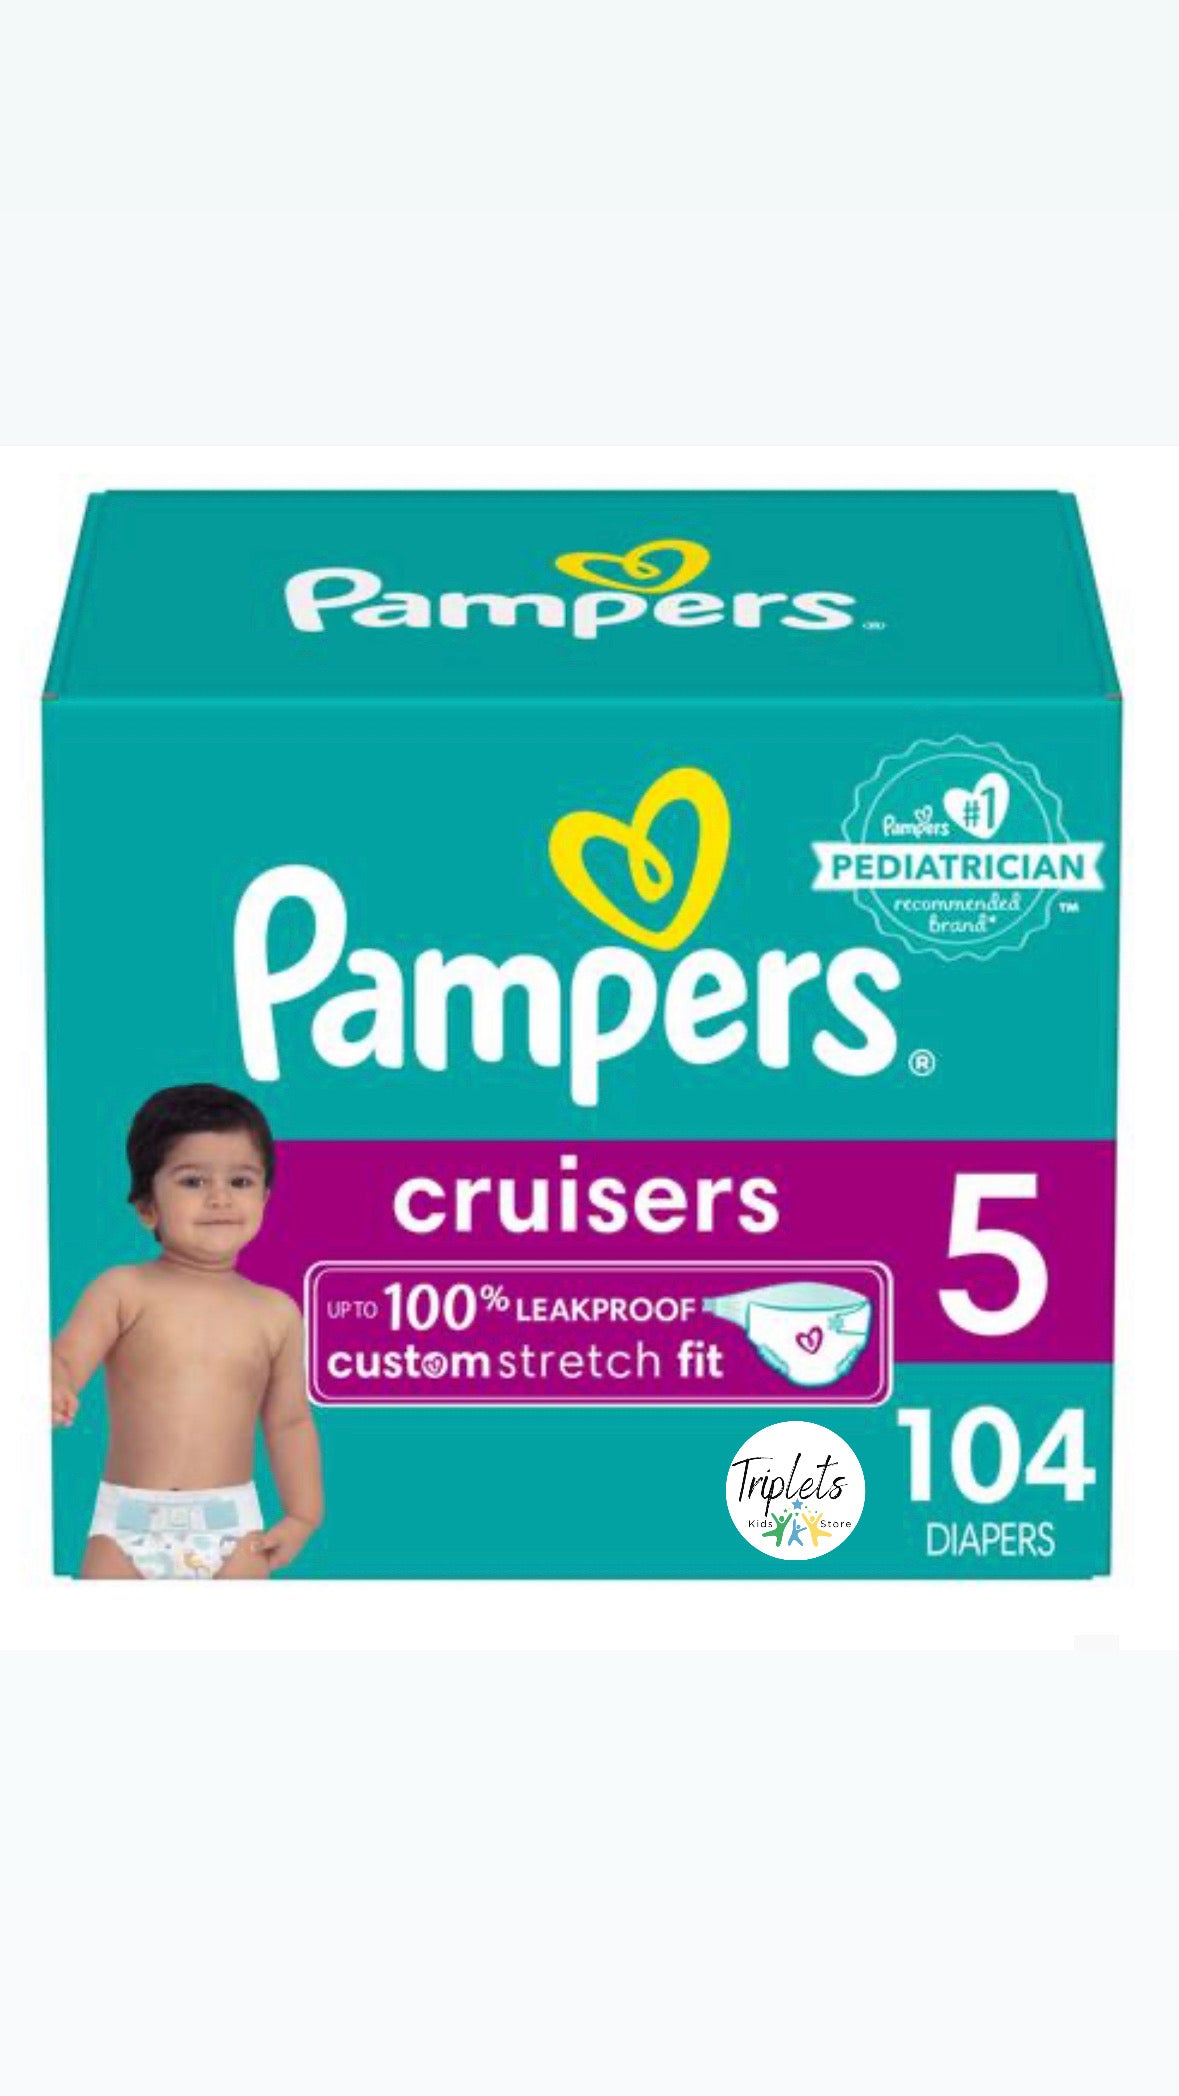 Pampers Pañales Cruisers Size 5